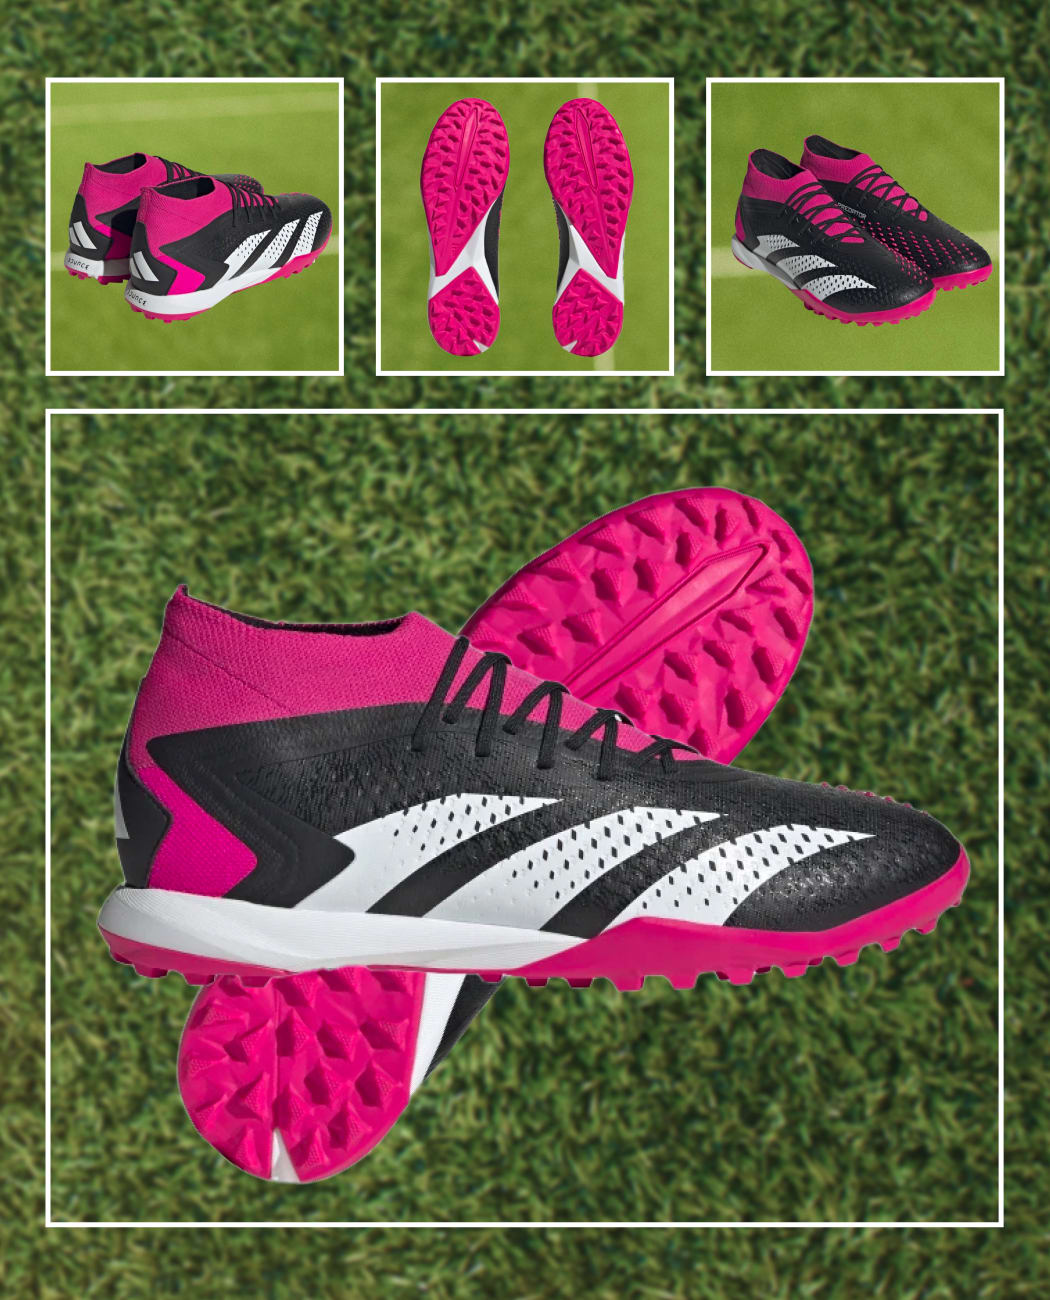 Soccer-Cleat-Buying-Guide-2023-Blog-Image-05